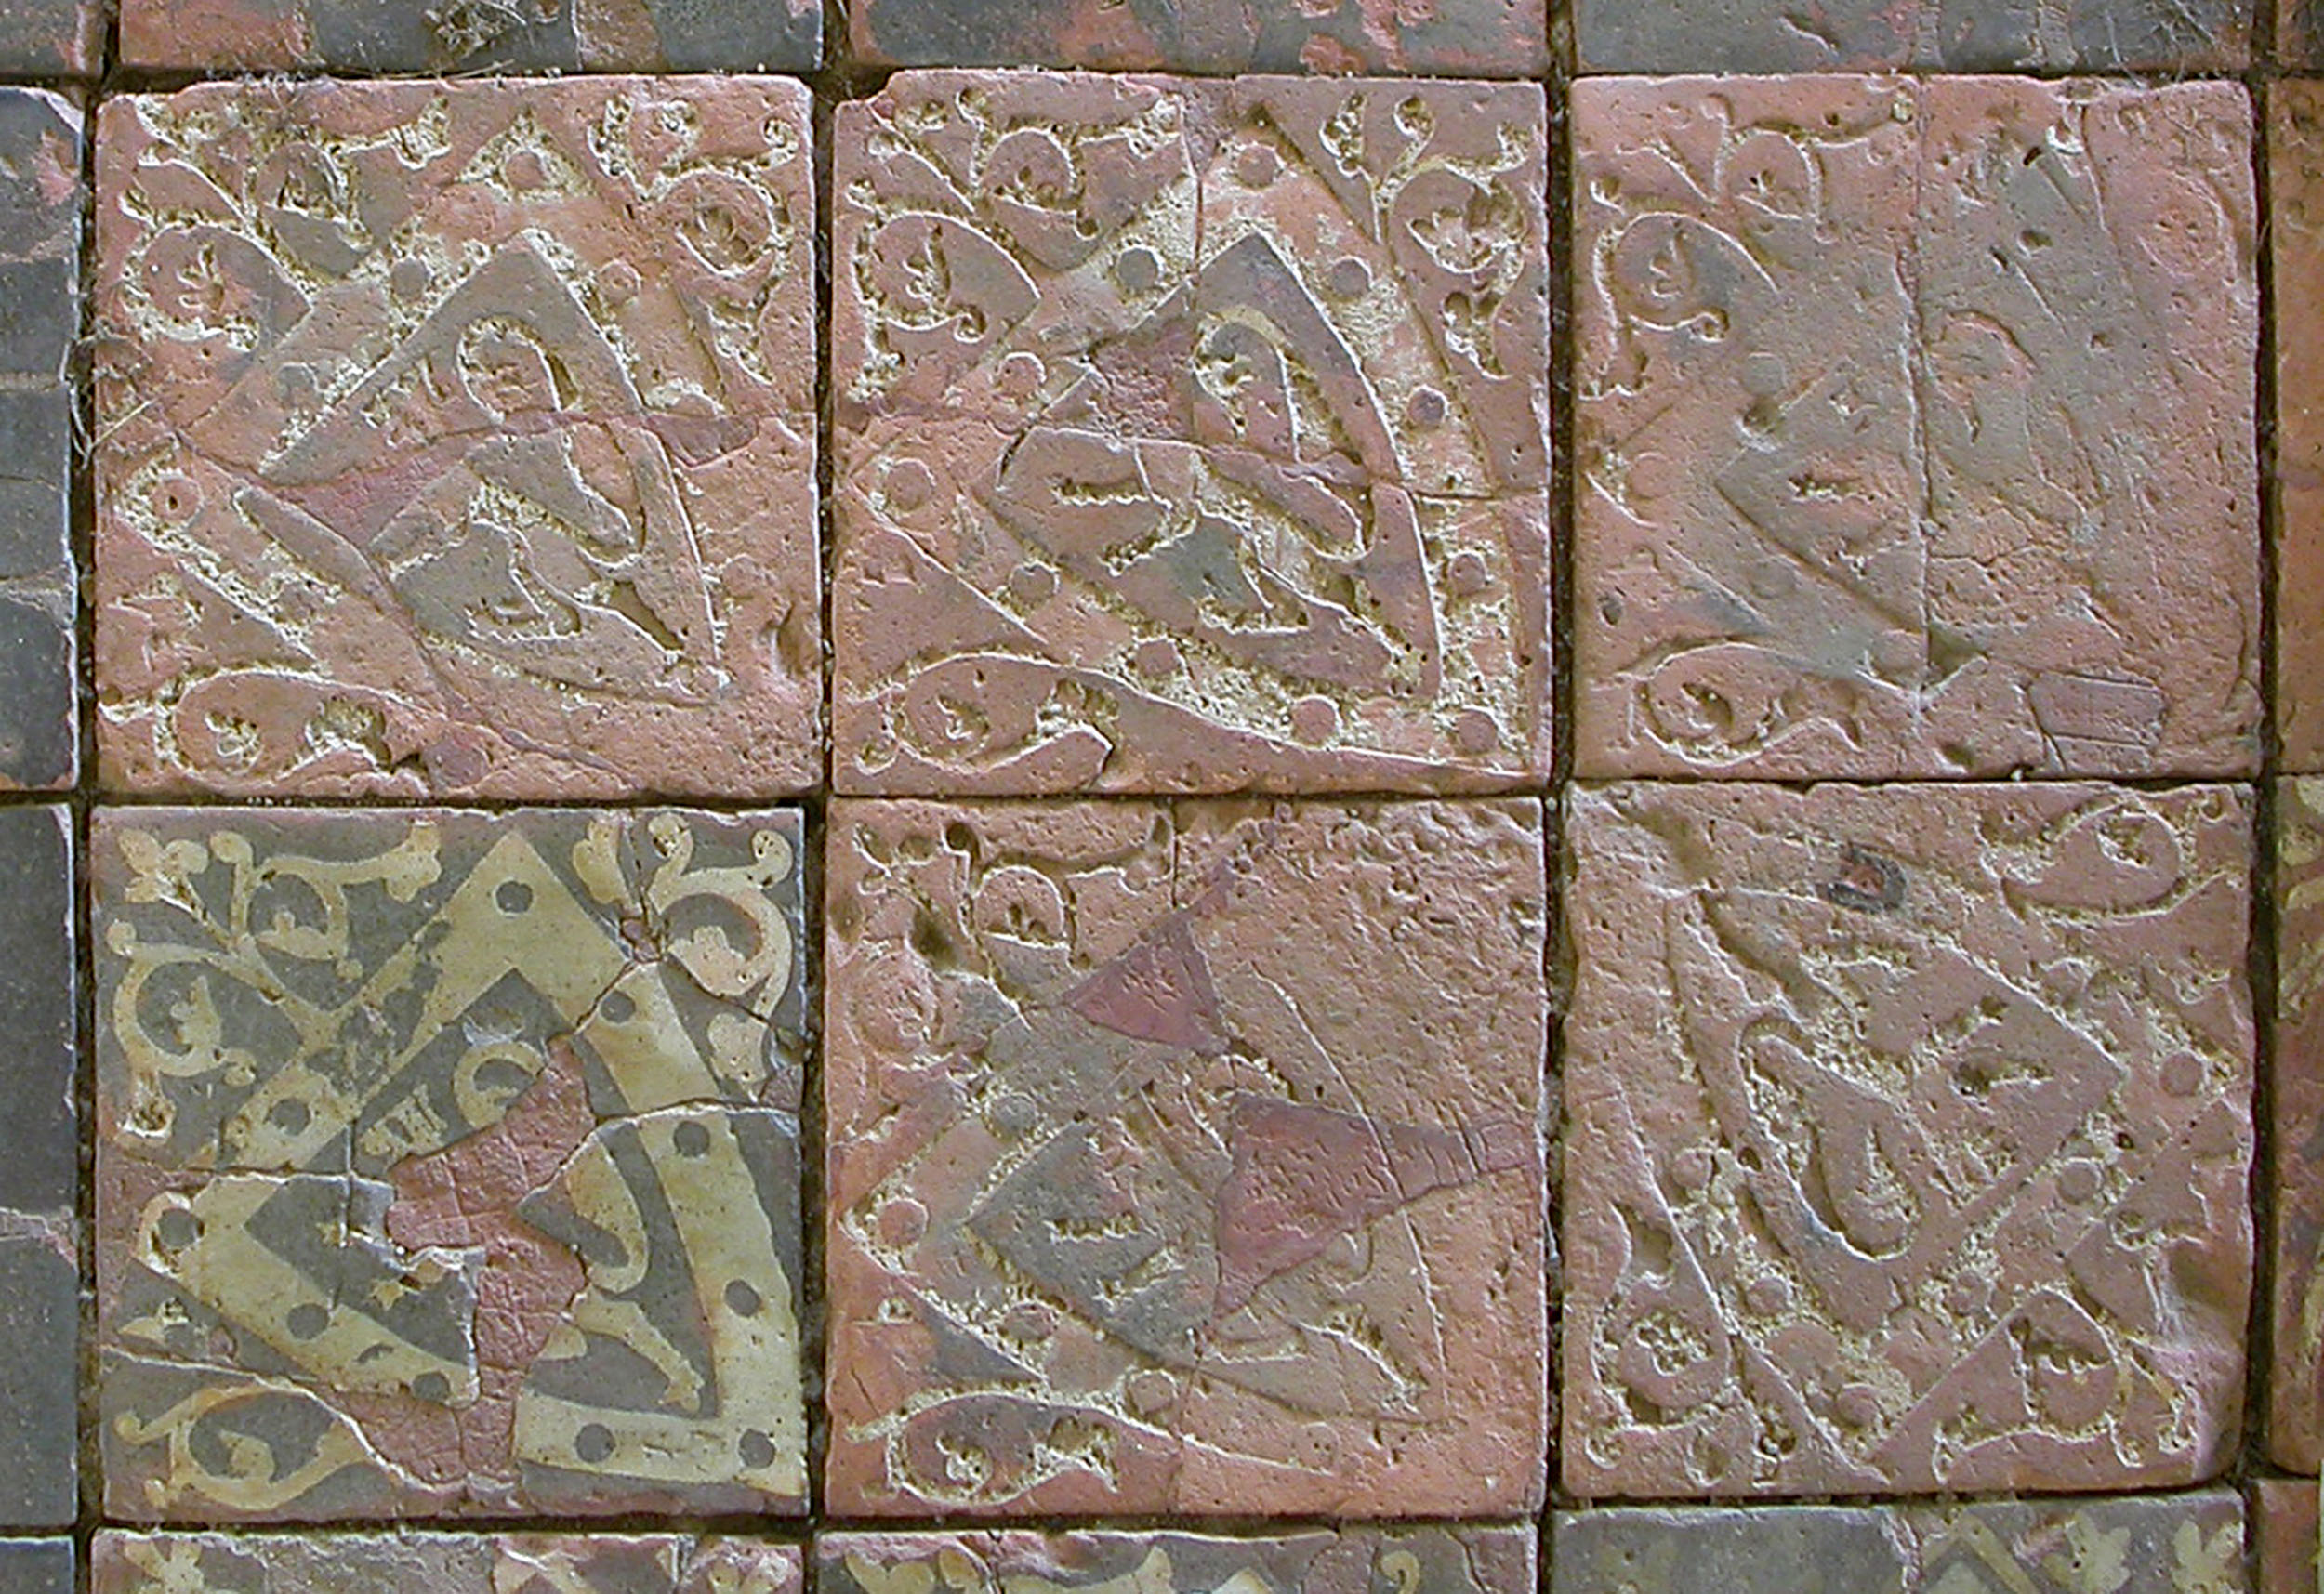 The Frater pavement, Cleeve Abbey, Somerset (13th century).